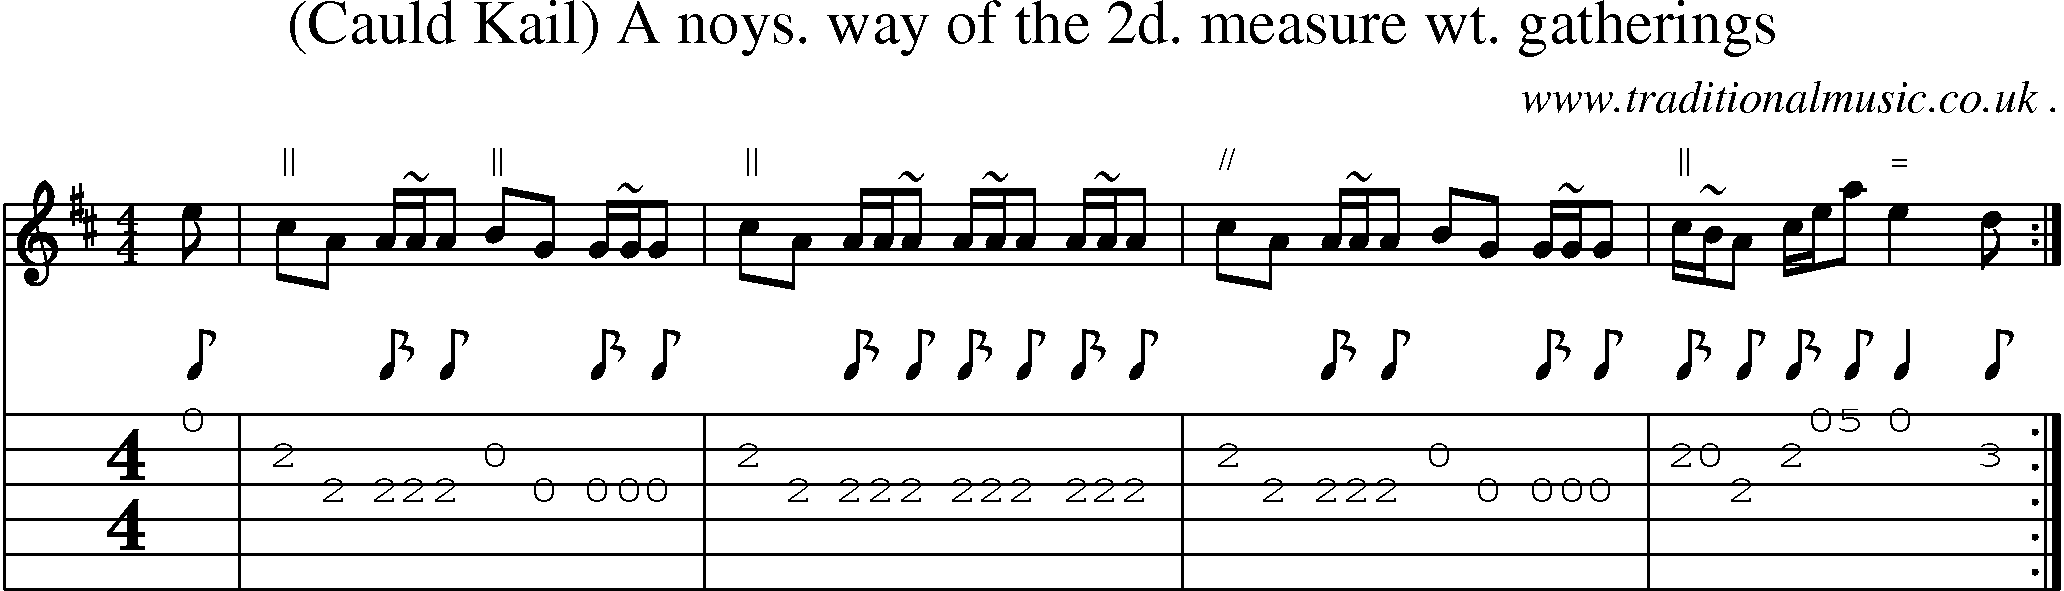 Sheet-music  score, Chords and Guitar Tabs for Cauld Kail A Noys Way Of The 2d Measure Wt Gatherings